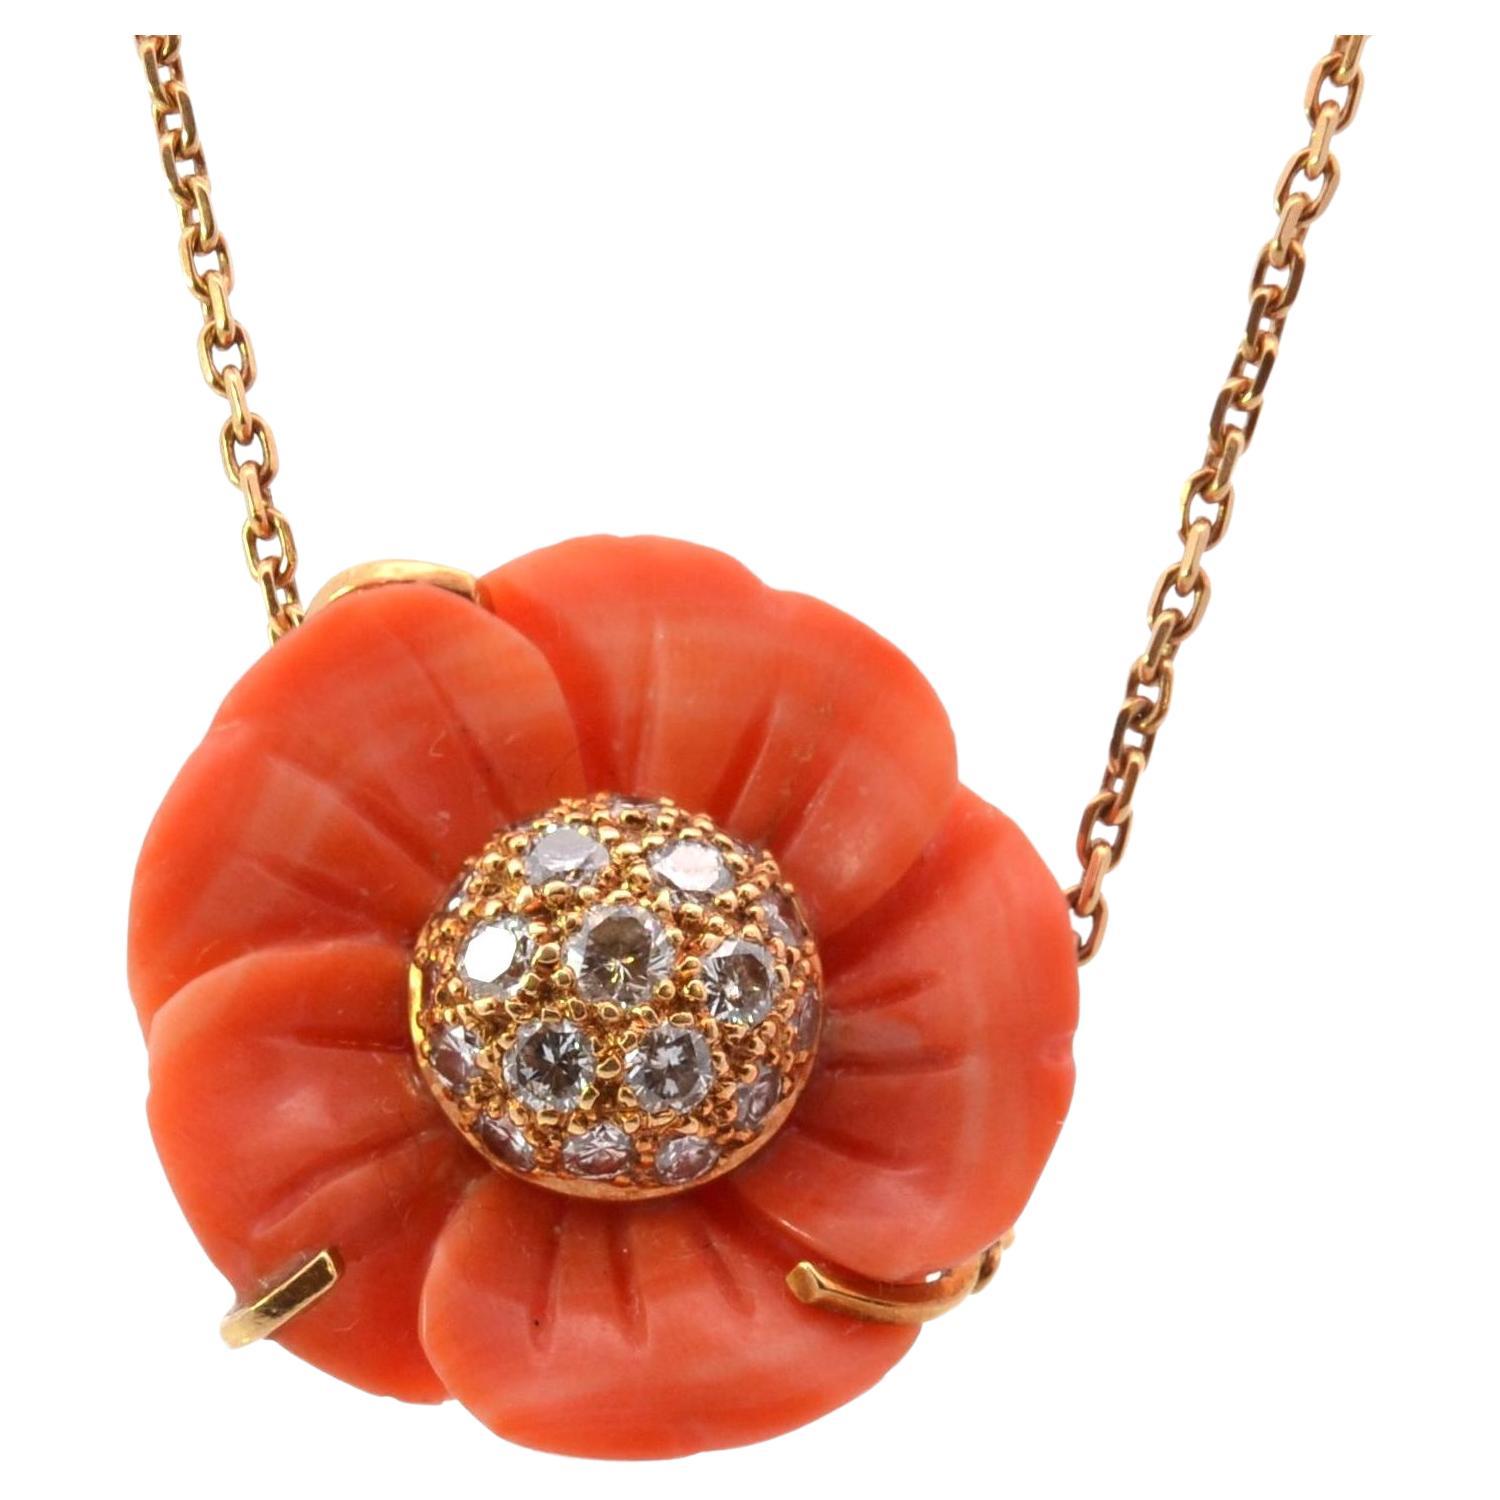 Coral and diamonds pendant necklace